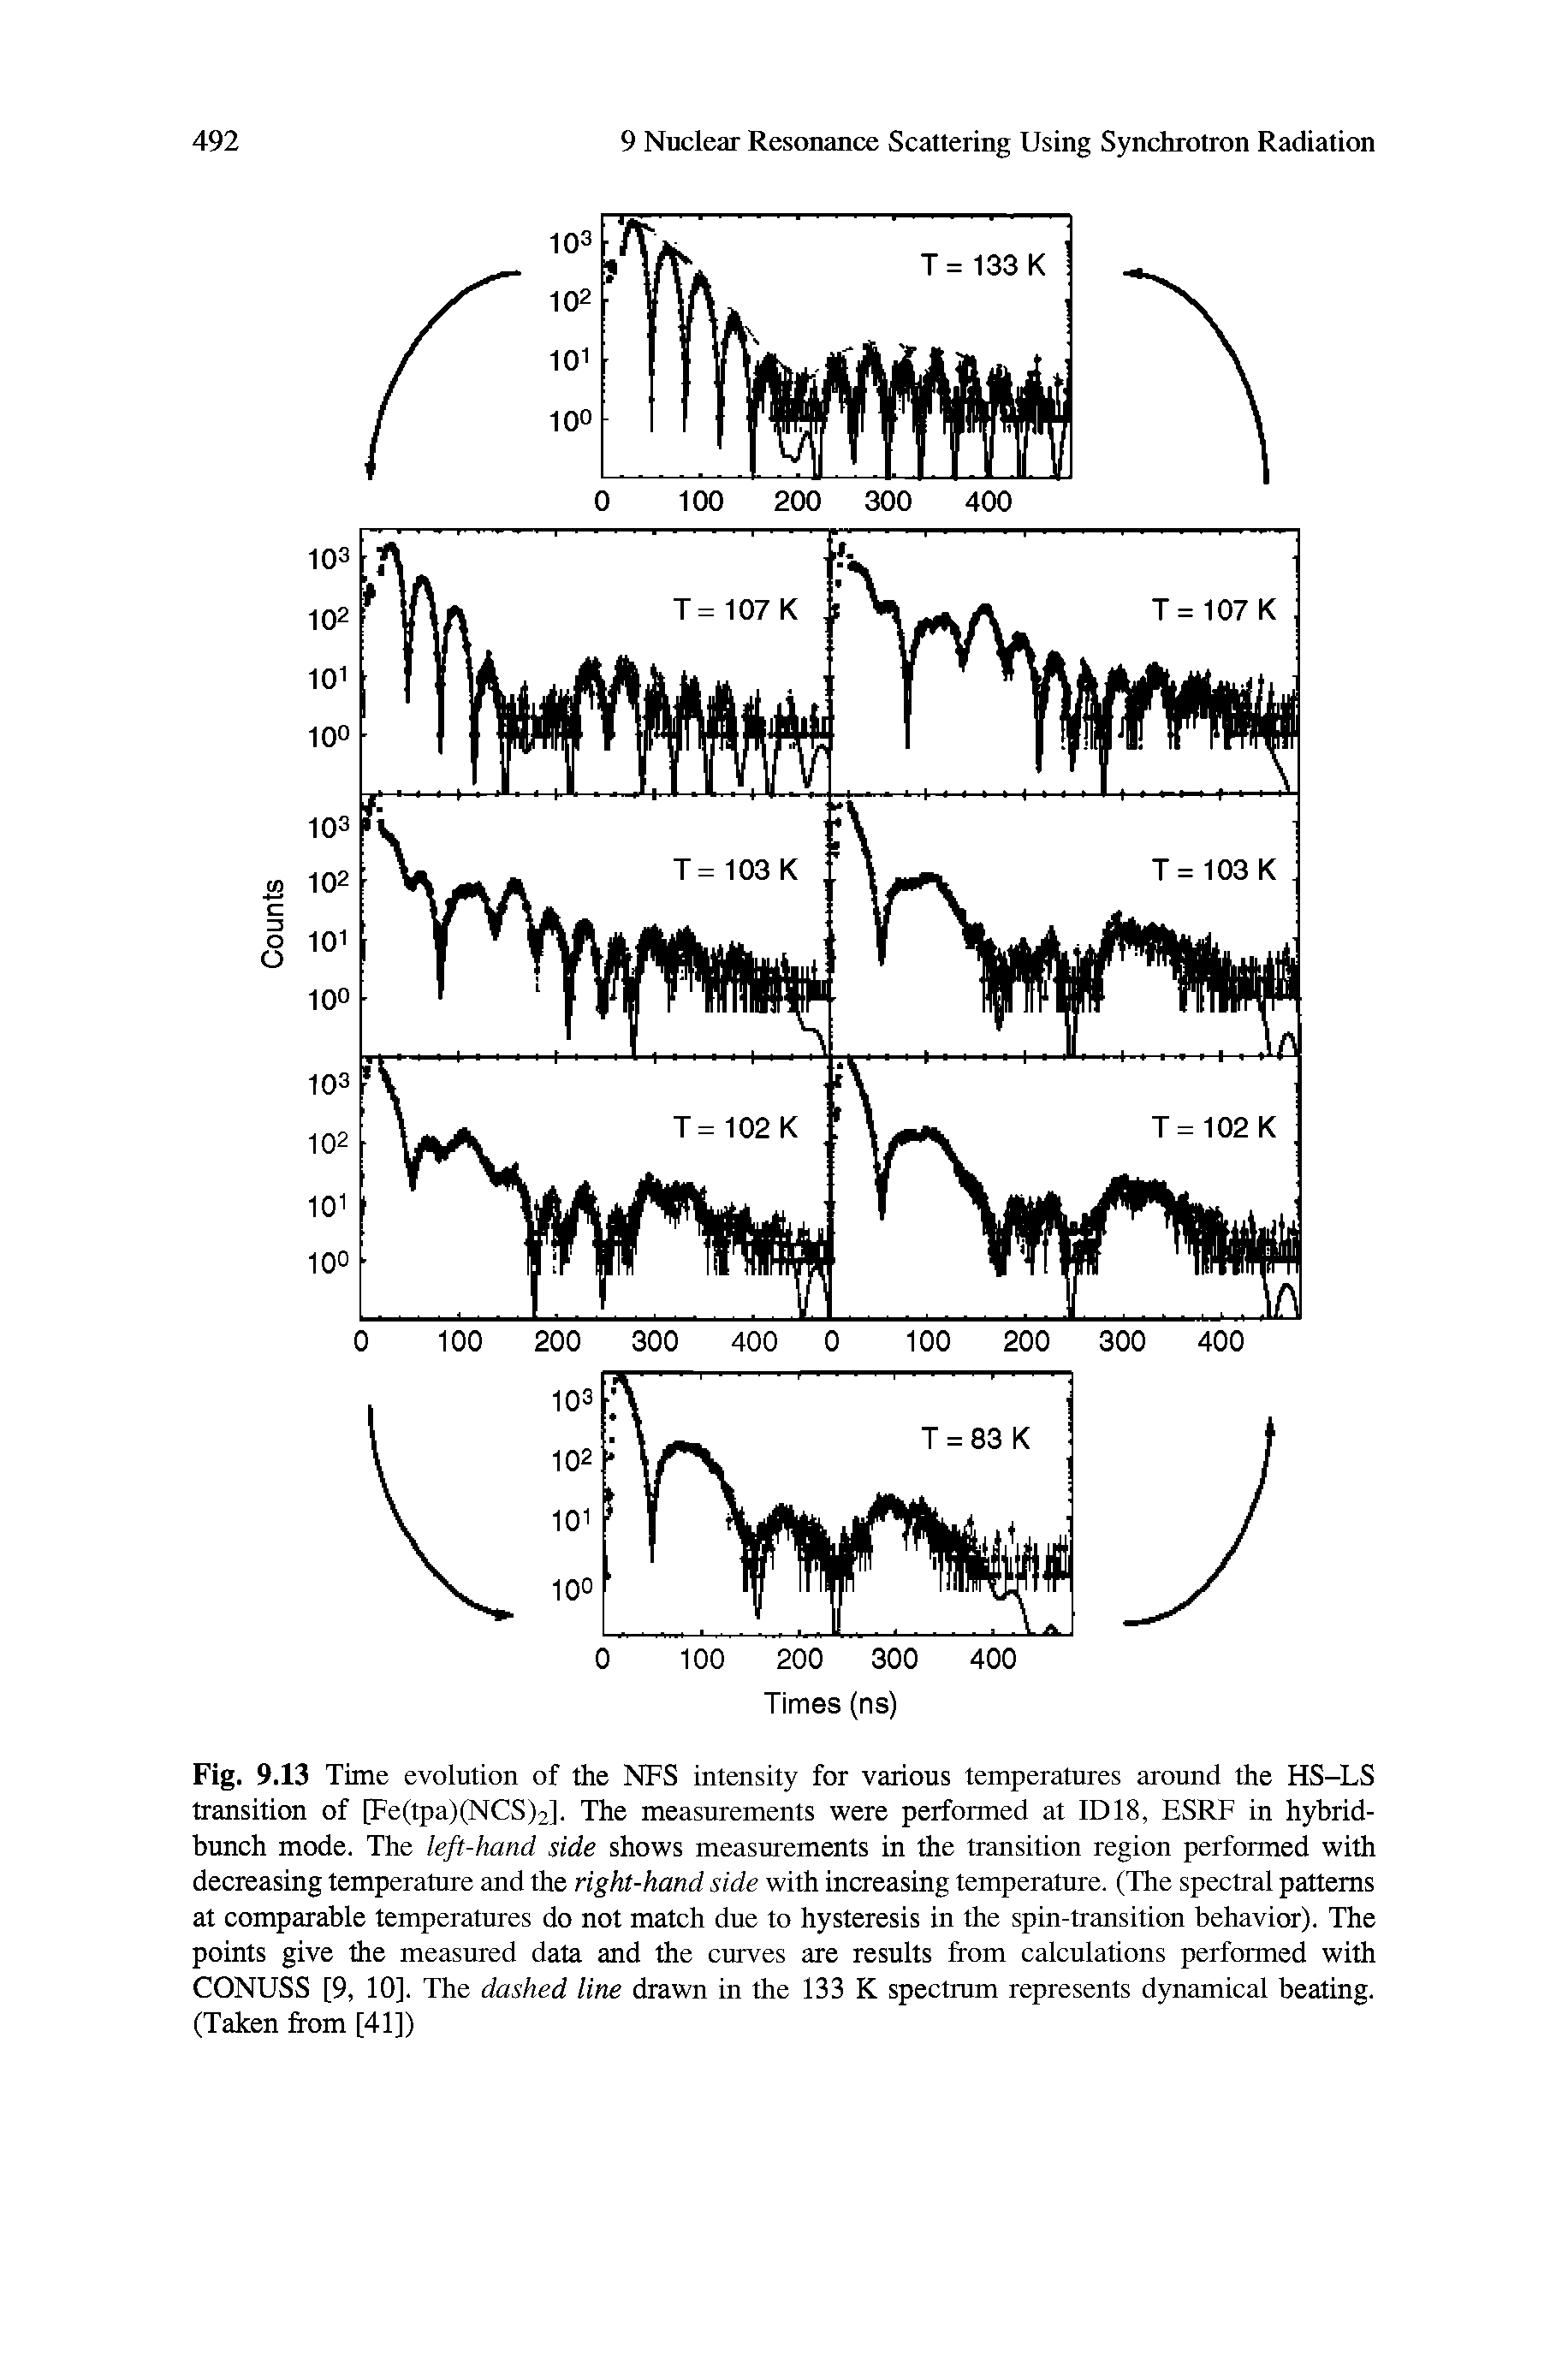 Fig. 9.13 Time evolution of the NFS intensity for various temperatures around the HS-LS transition of [Fe(tpa)(NCS)2]. The measurements were performed at 1D18, ESRF in hybrid-bunch mode. The left-hand side shows measurements in the transition region performed with decreasing temperature and the right-hand side with increasing temperature. (The spectral patterns at comparable temperatures do not match due to hysteresis in the spin-transition behavior). The points give the measured data and the curves are results from calculations performed with CONUSS [9, 10]. The dashed line drawn in the 133 K spectmm represents dynamical beating. (Taken from [41])...